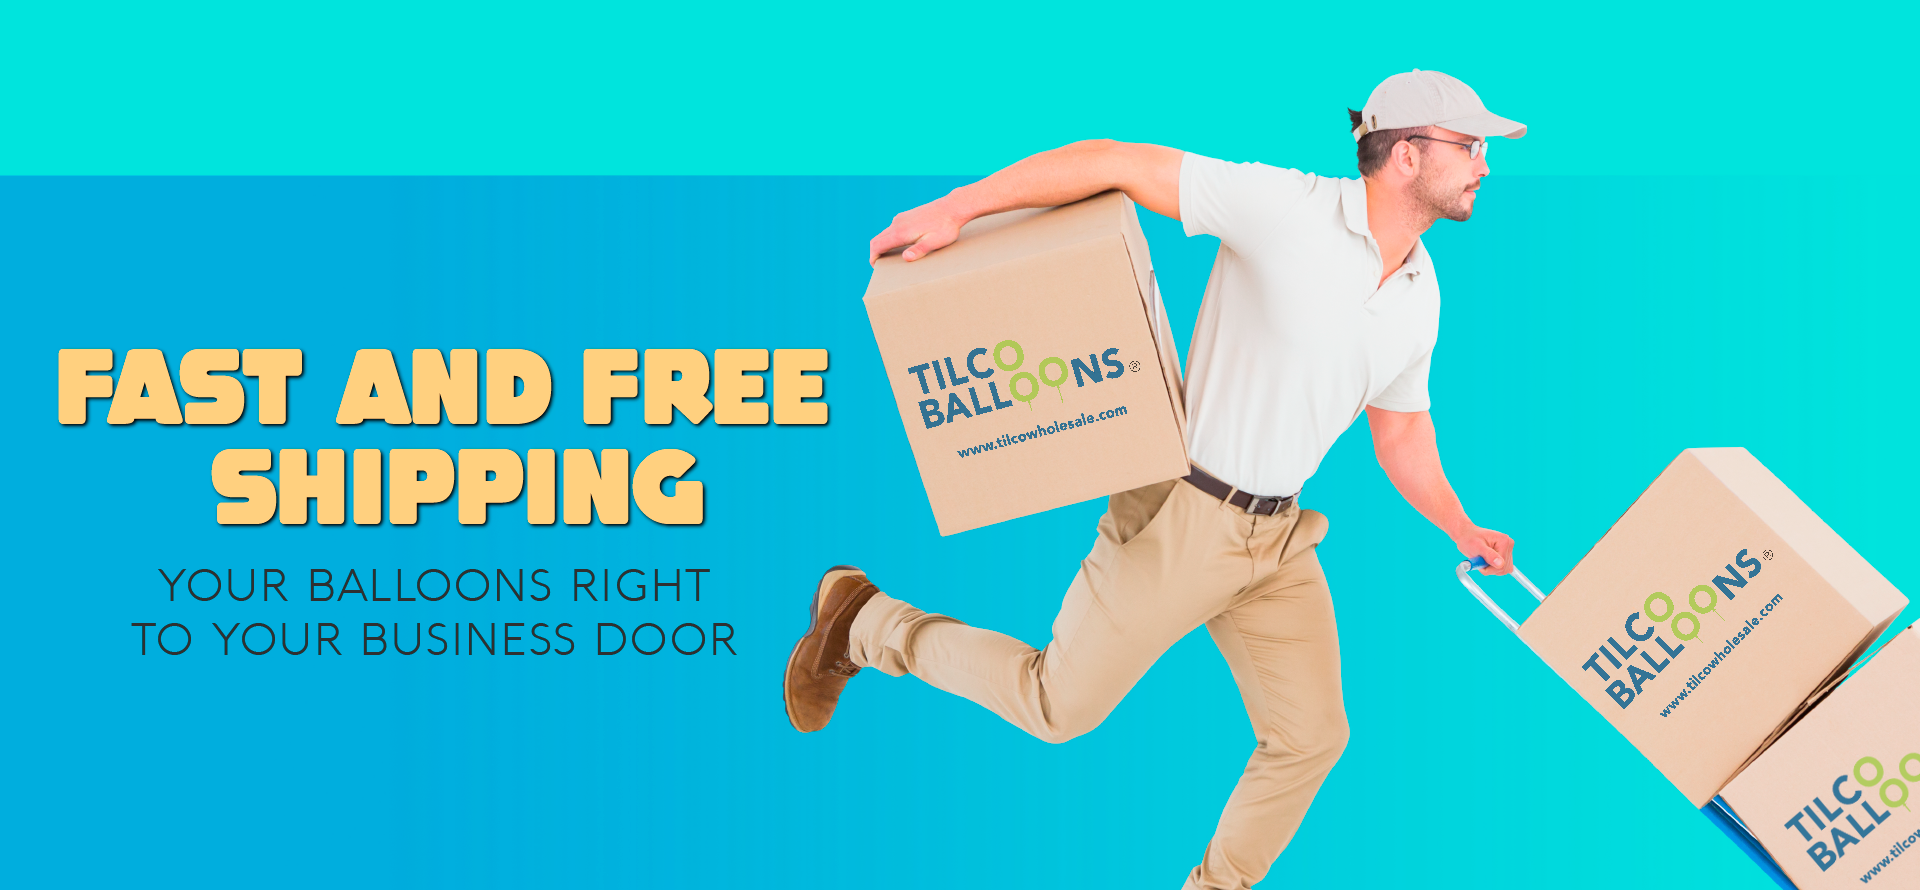 Fast and free shipping, your balloons right to your business door